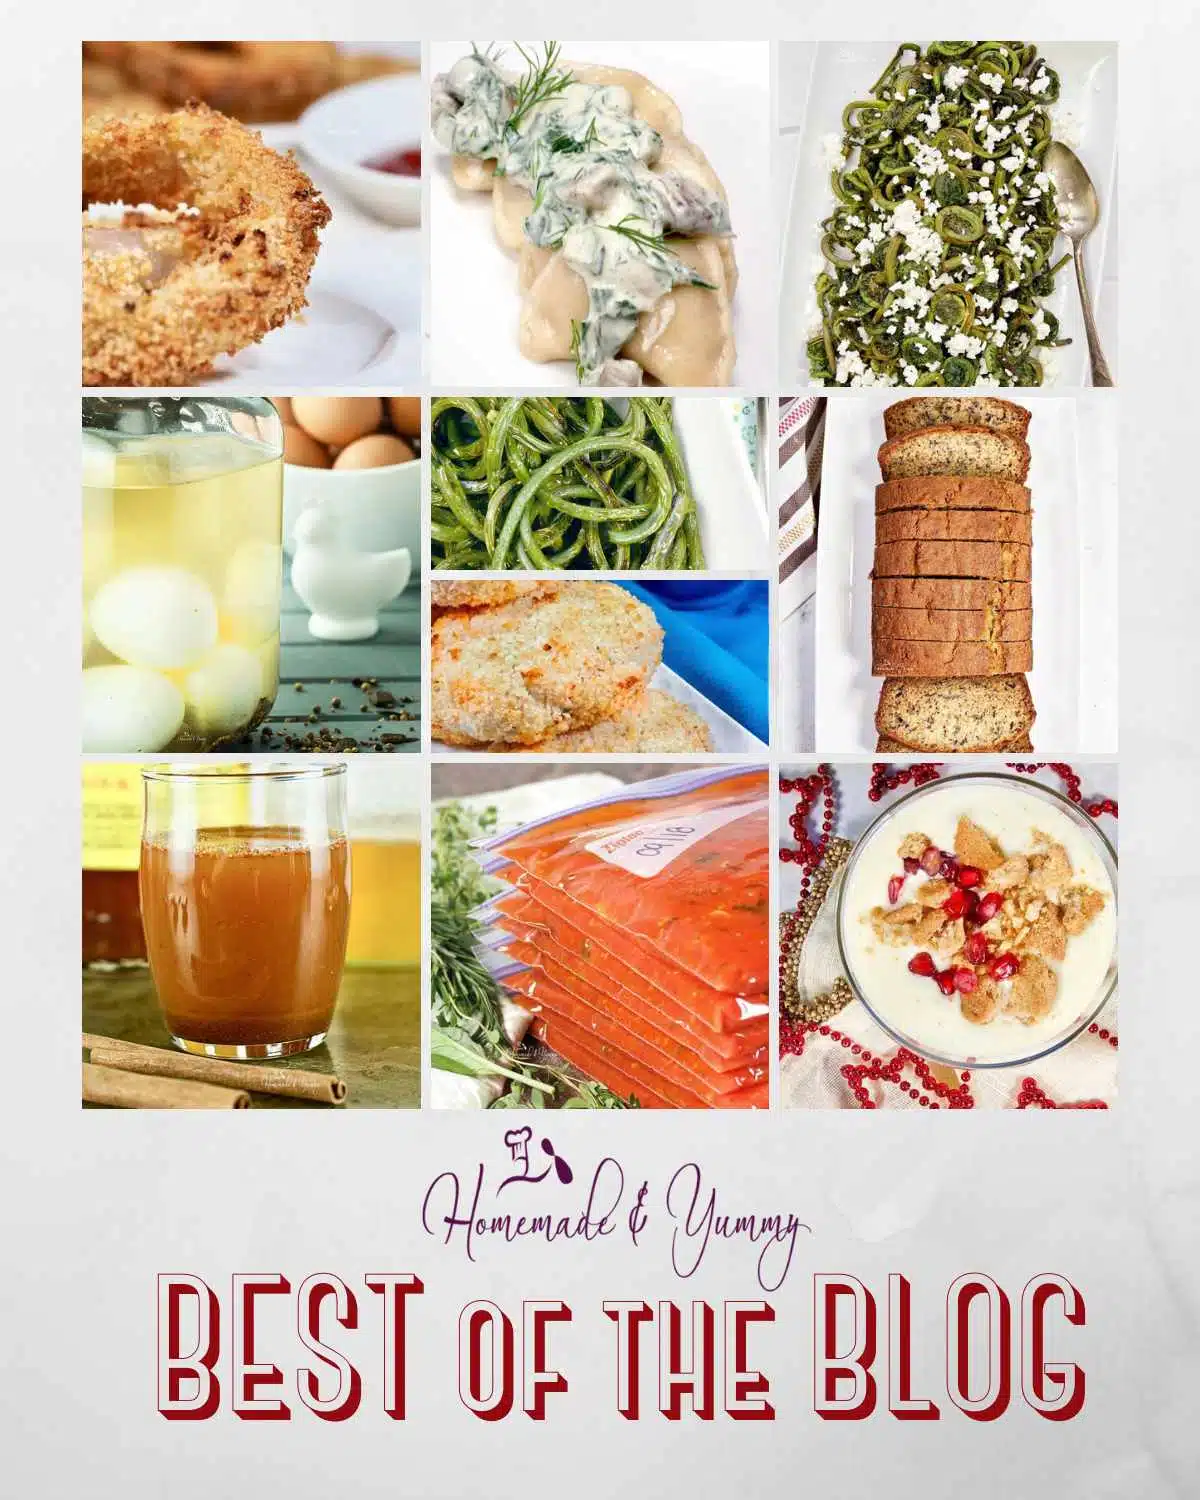 The BEST of the BLOG top 10 recipes.